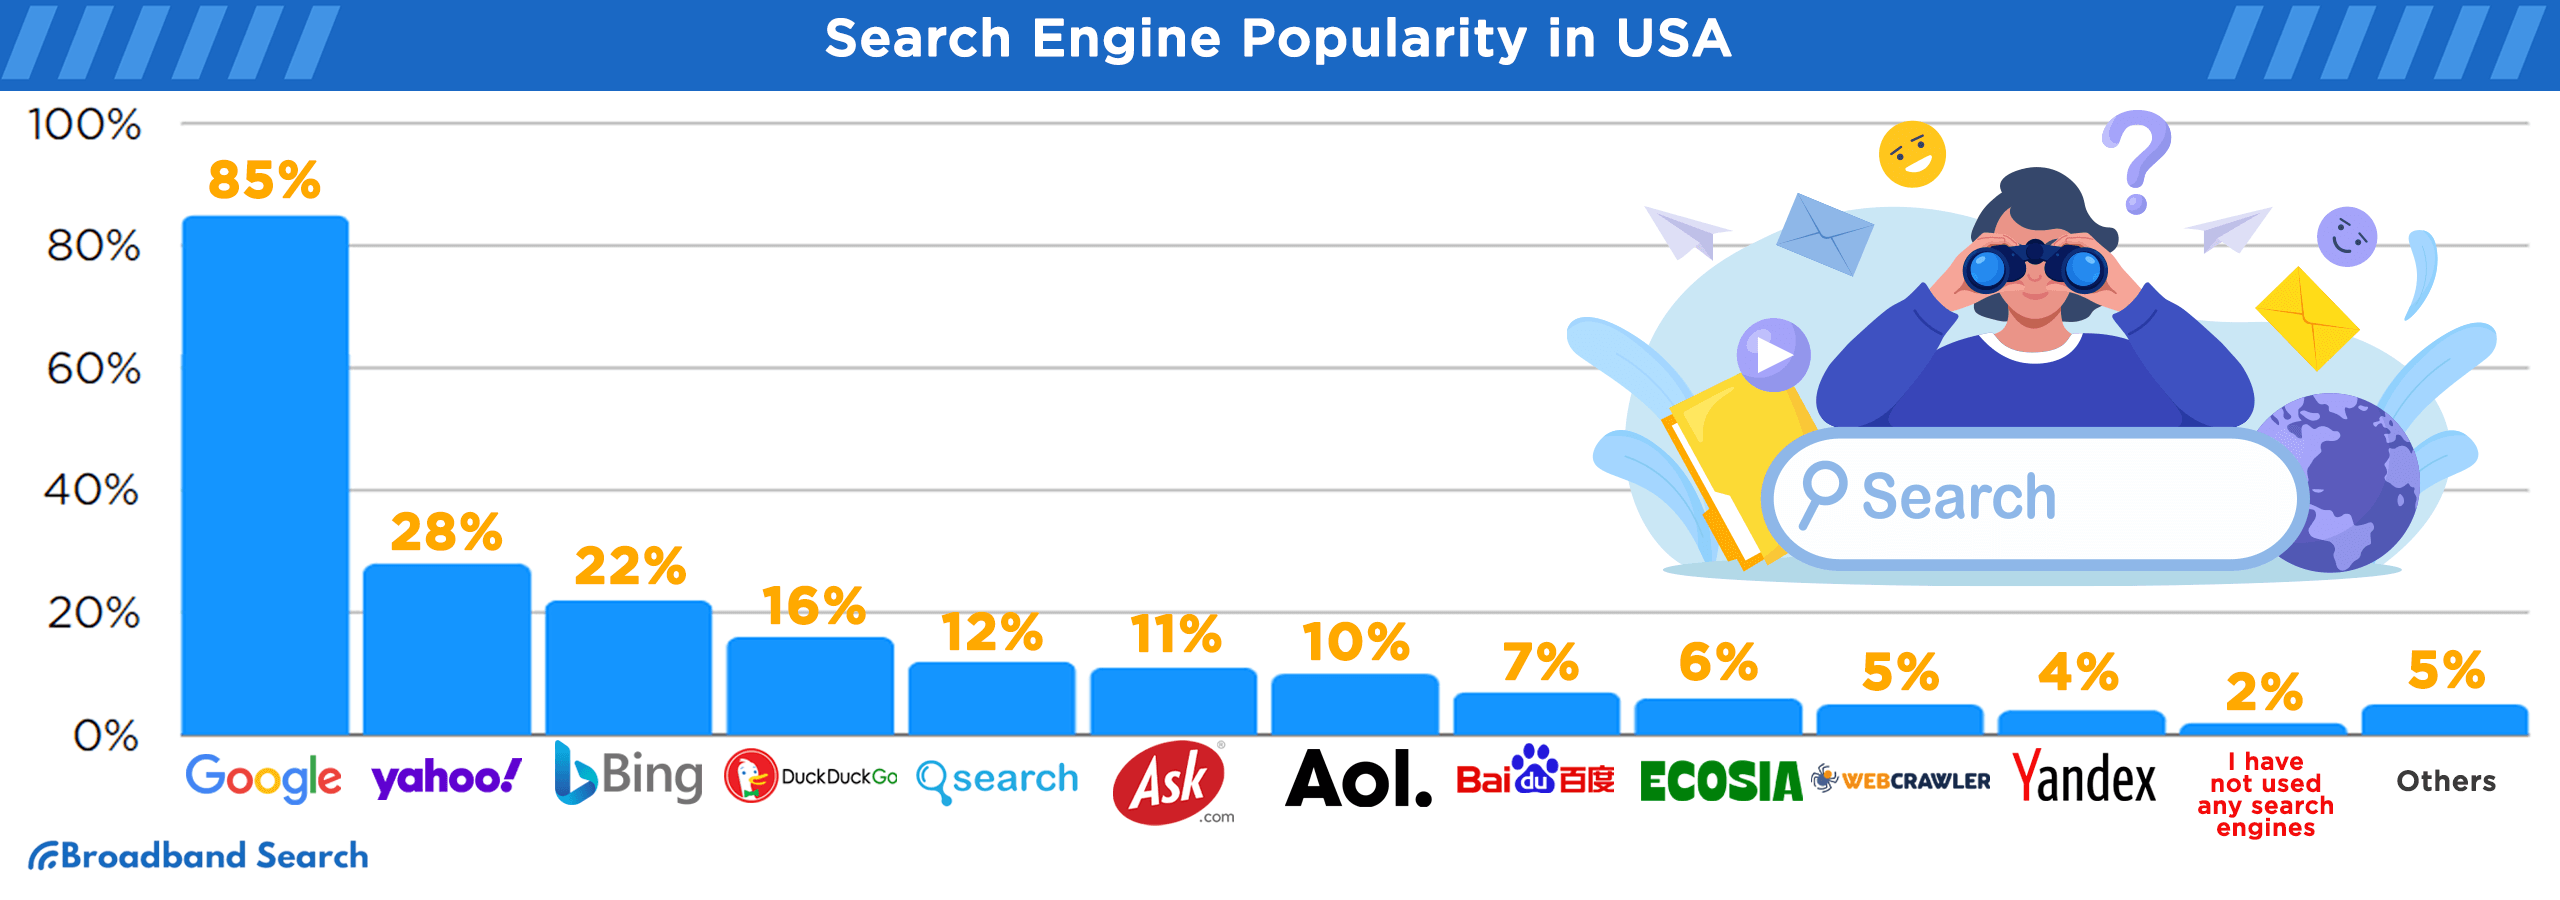 Search engine popularity in the united states